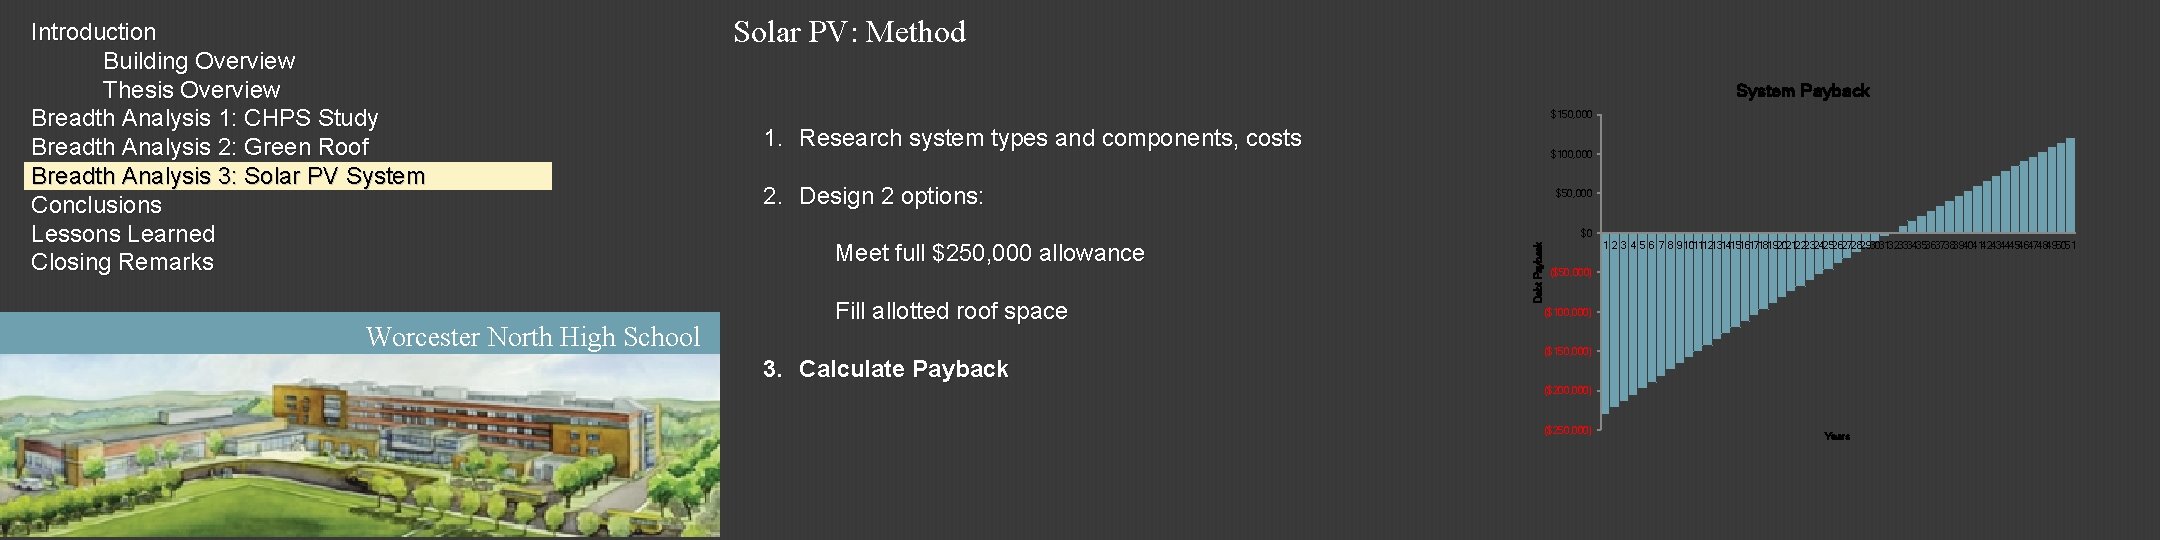 Worcester North High School Solar PV: Method System Payback $150, 000 1. Research system